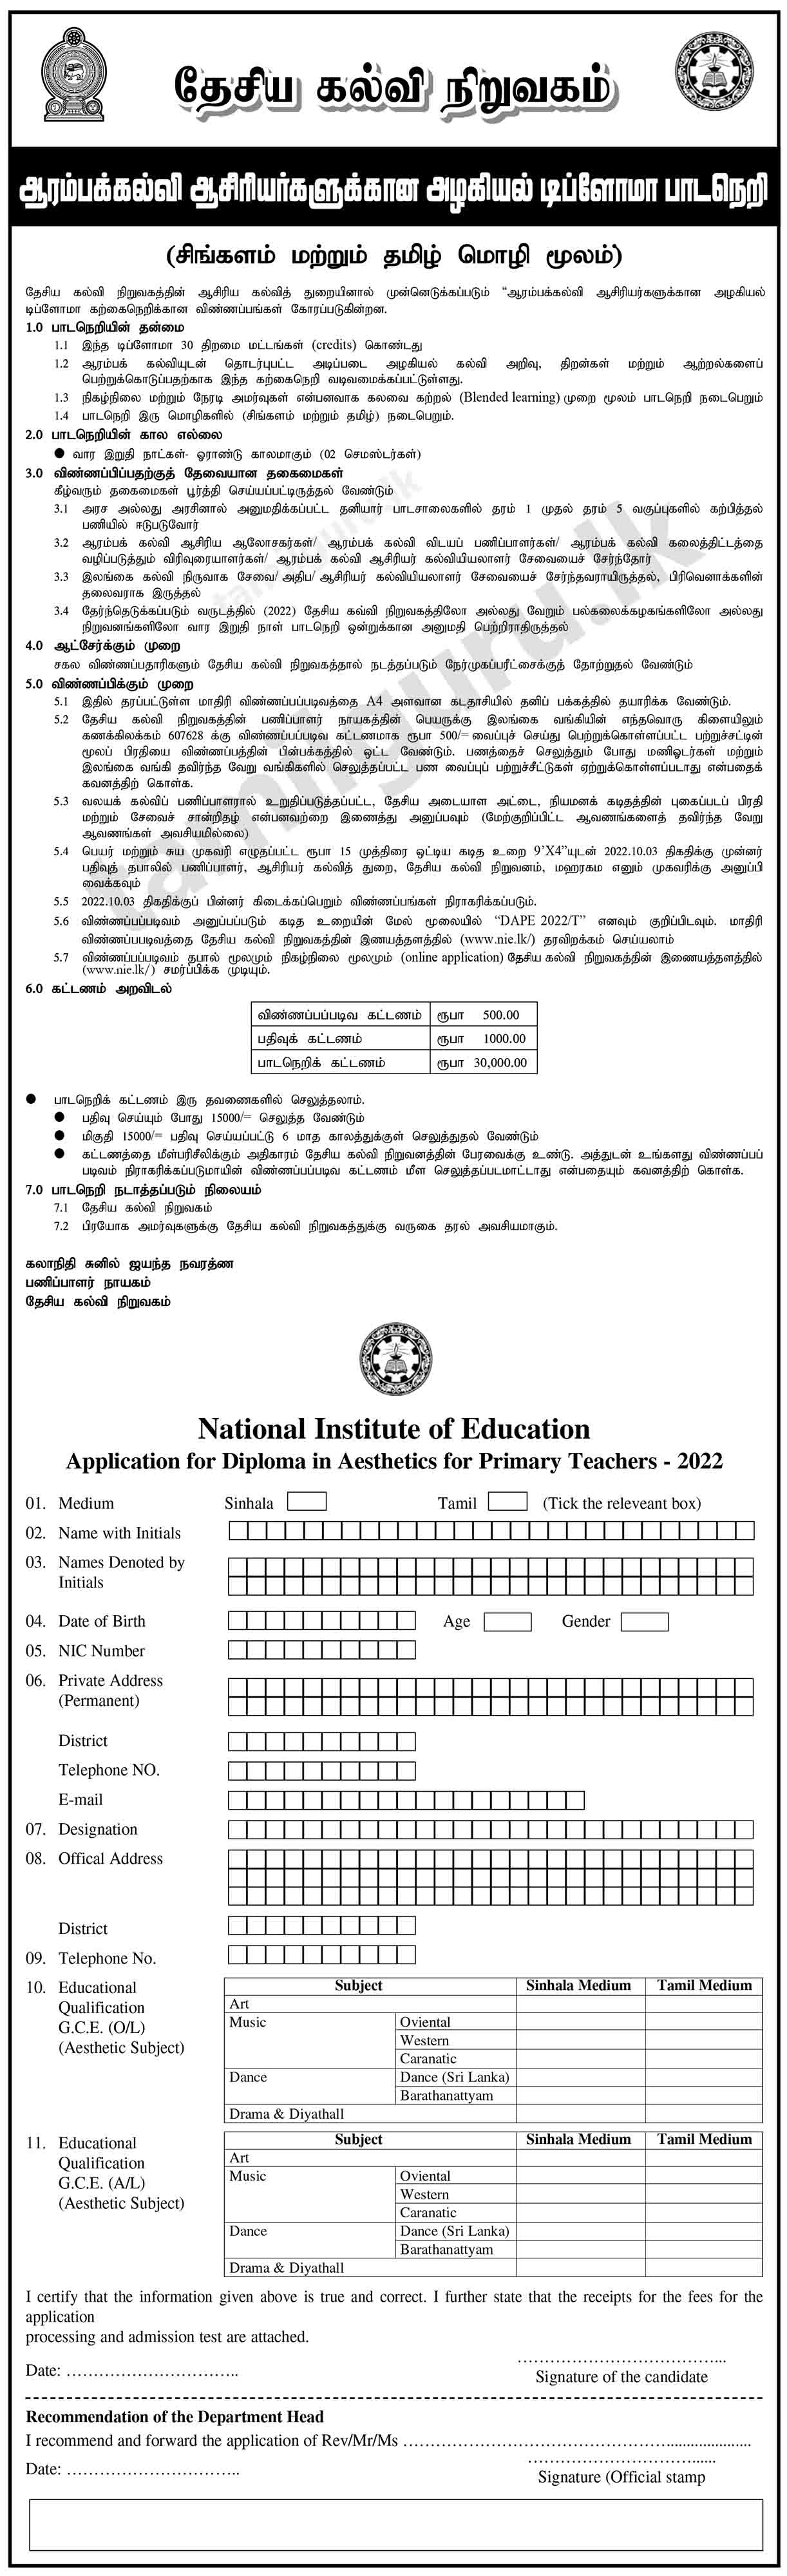 Diploma in Aesthetics for Primary Teachers (2022) (Course) - National Institute of Education (NIE) - Details in Tamil